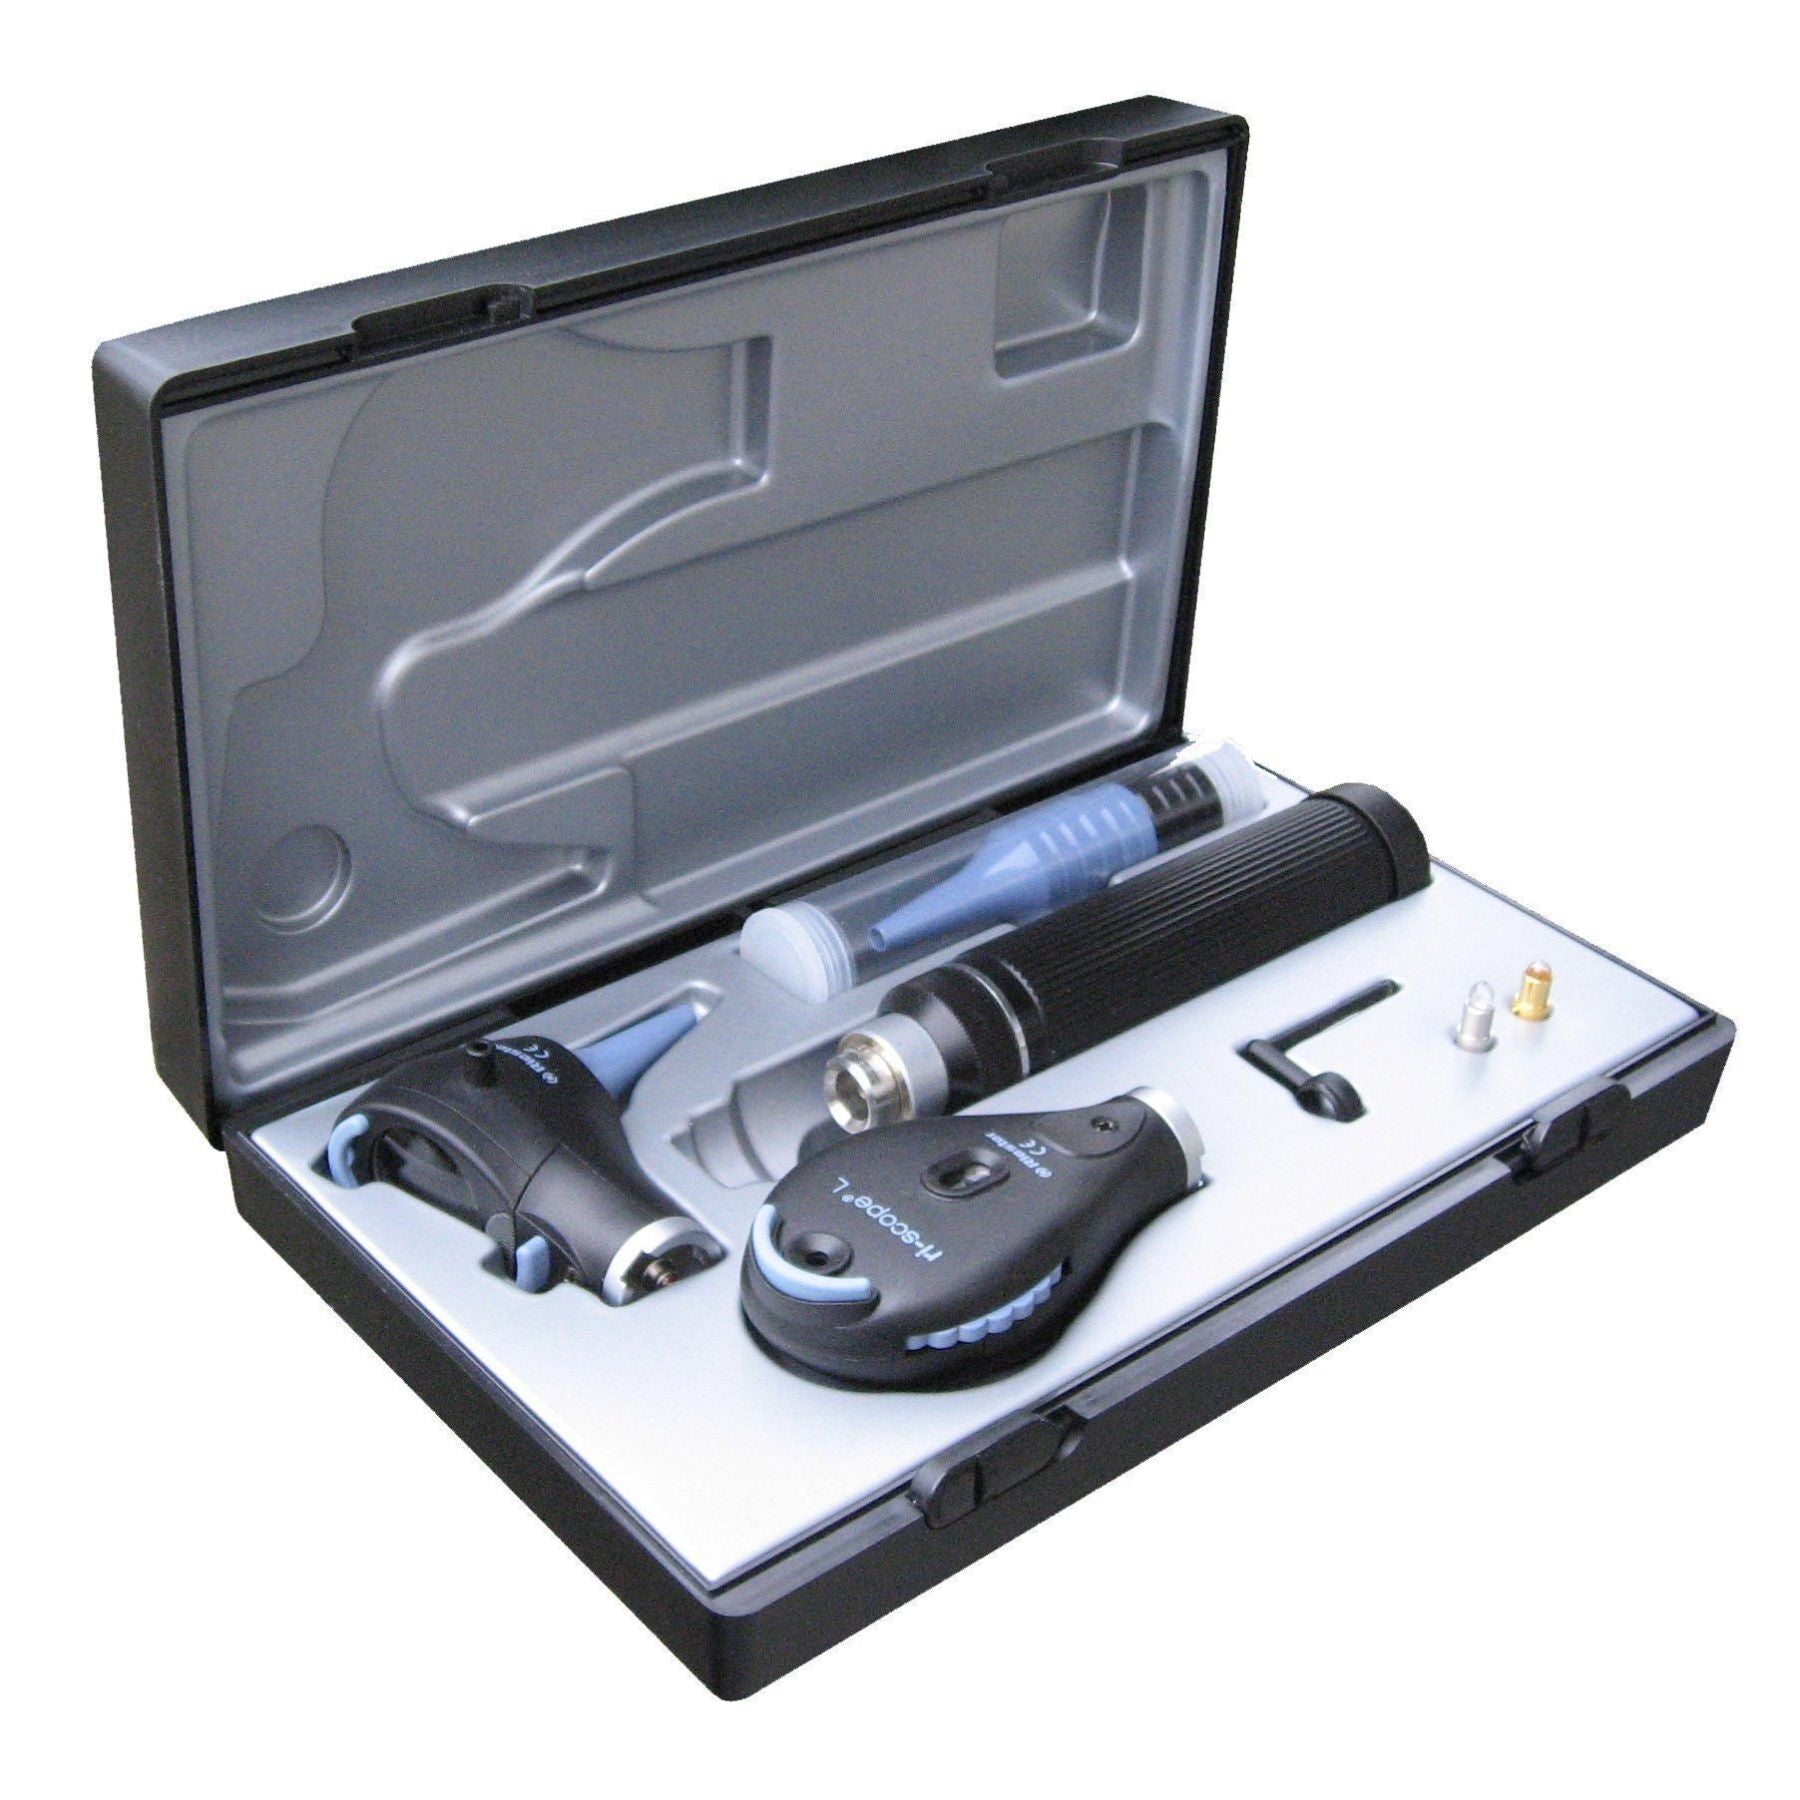 Riester Ri-Scope L Otoscope / Ophthalmoscope L3/L2 with Plug-In-Style Handle for Ri-Accu L